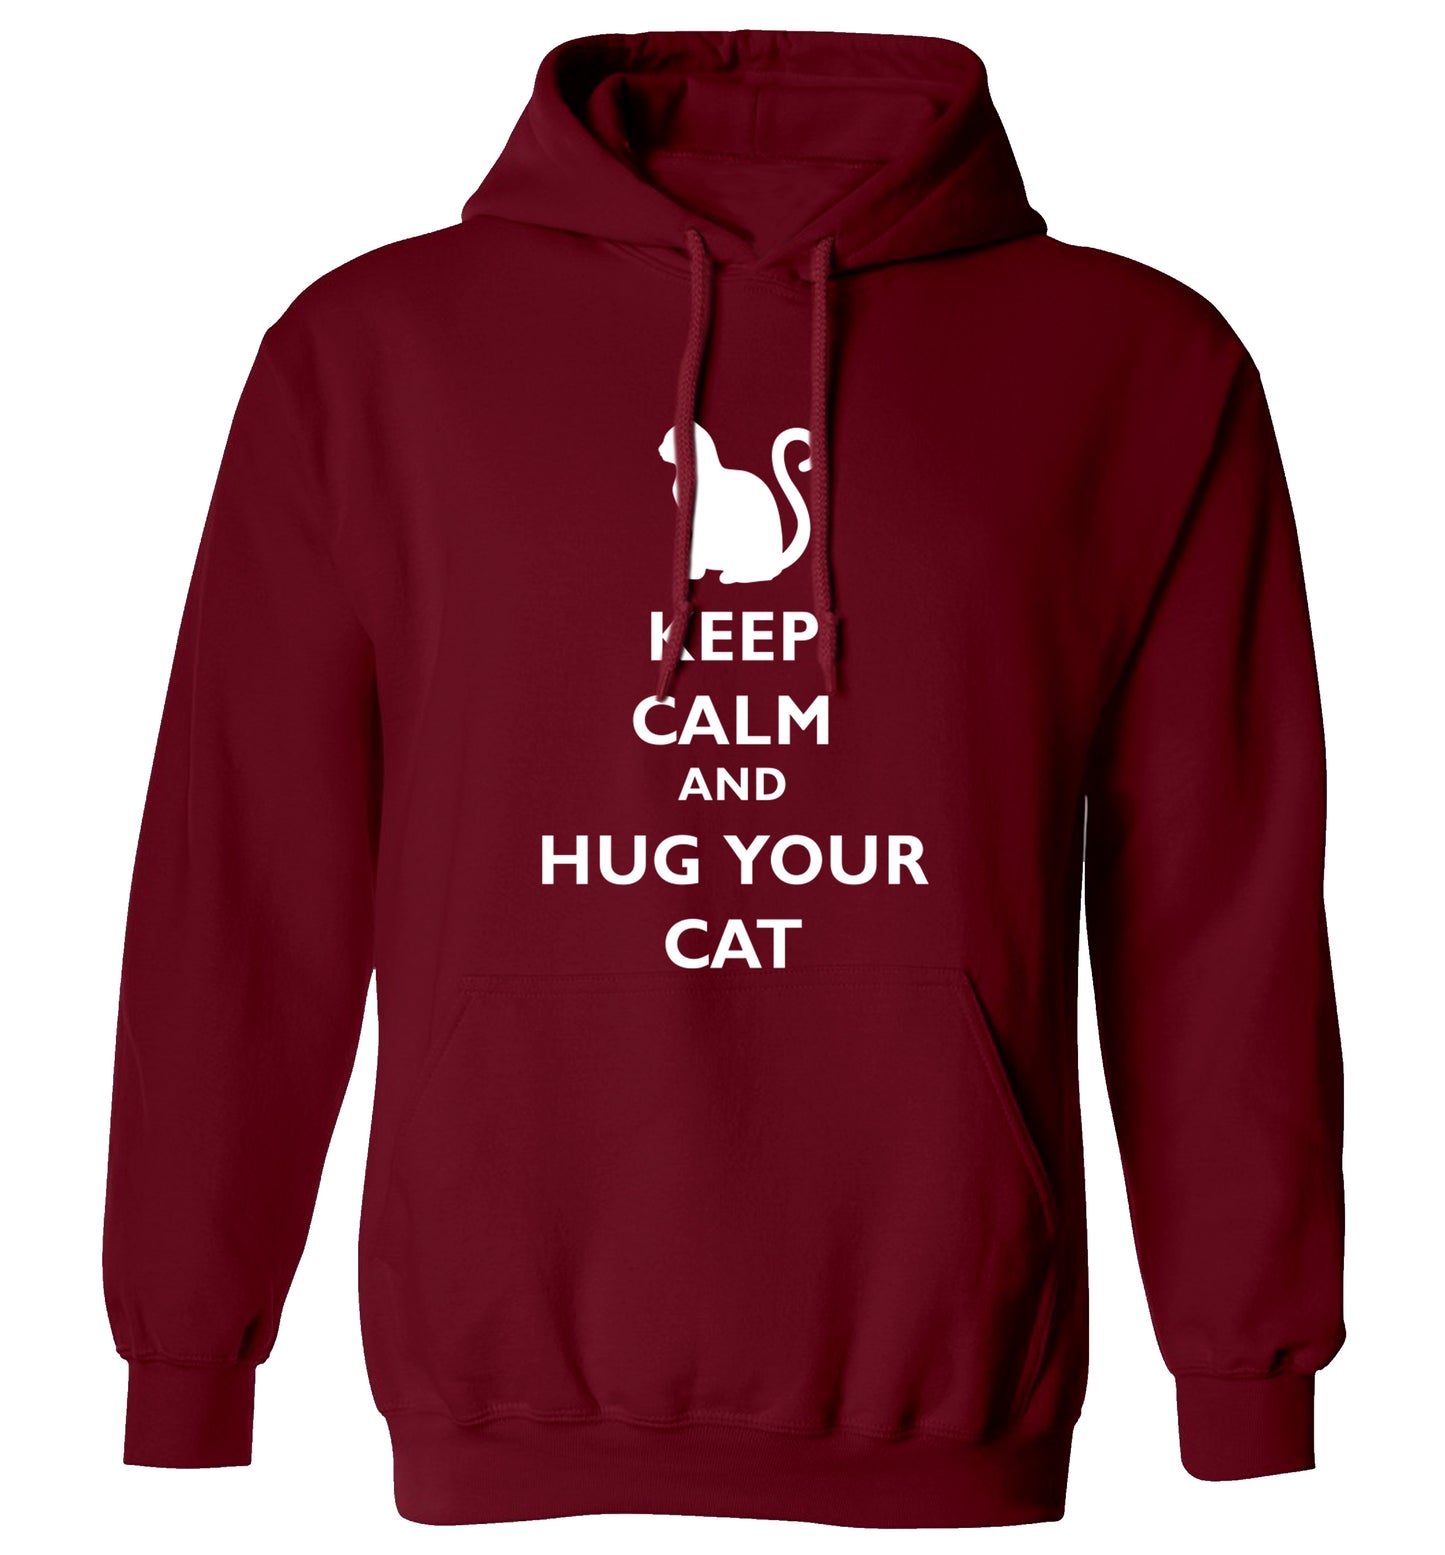 Keep calm and hug your cat adults unisex maroon hoodie 2XL